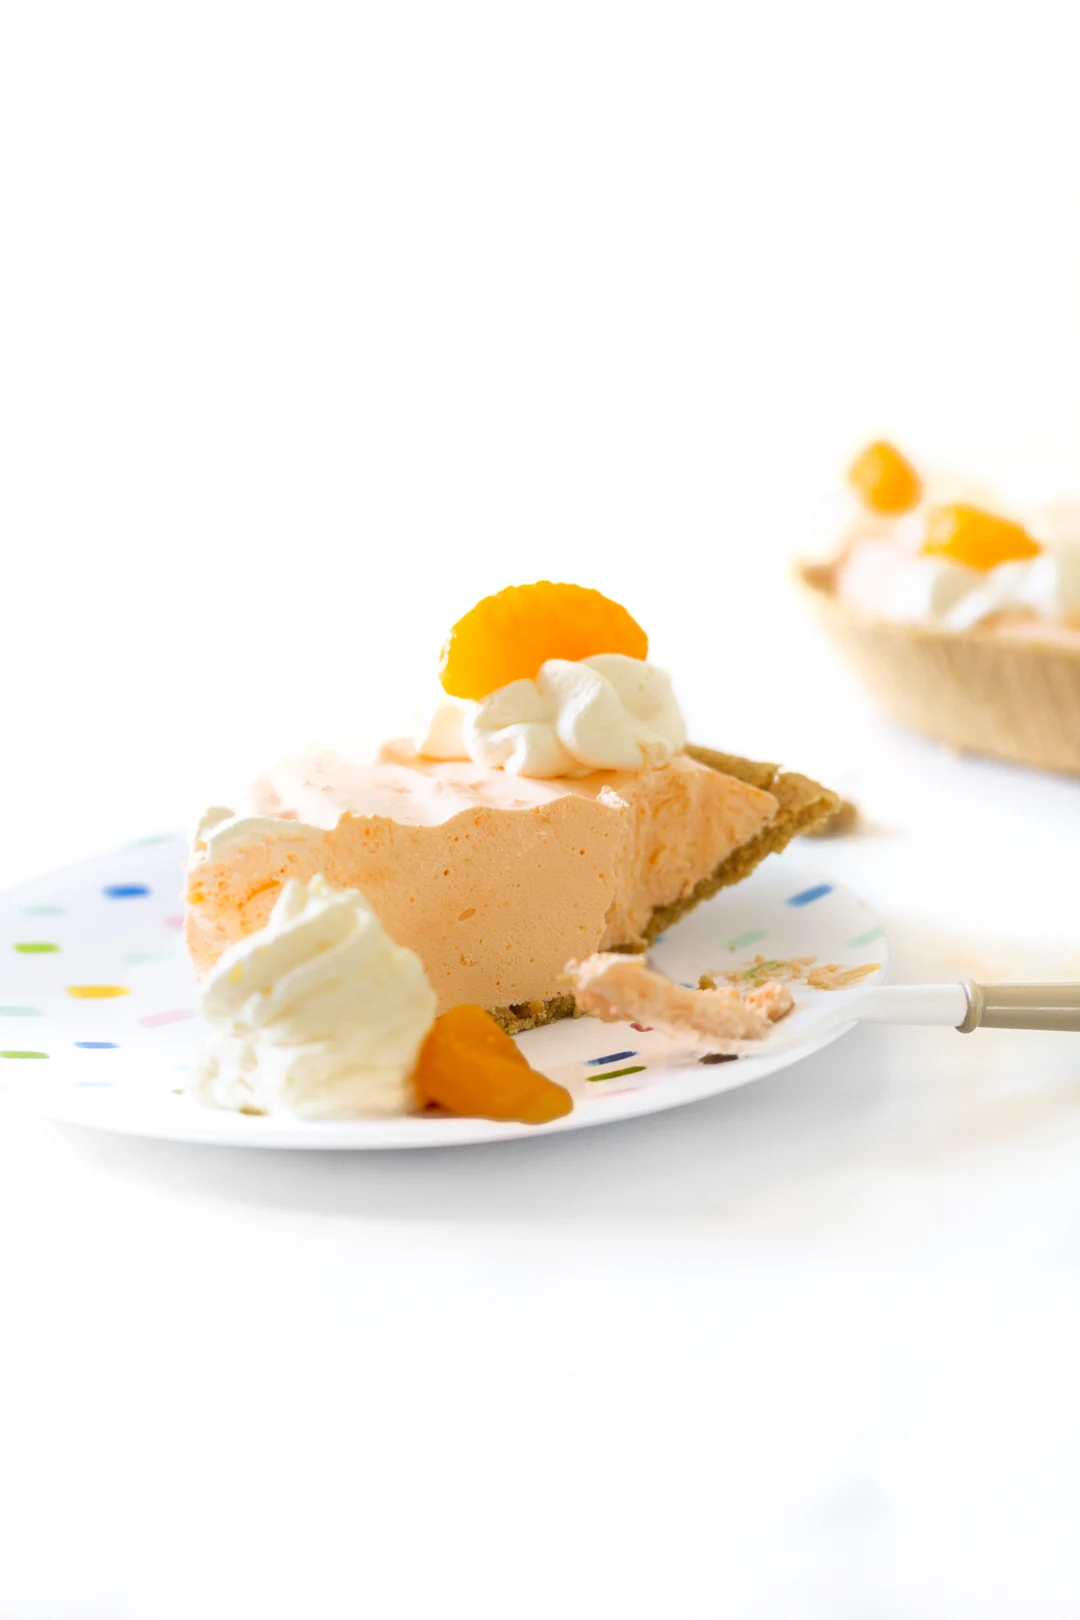 rich summer pie, slice shown on a plate with whipped cream and mandarin orange